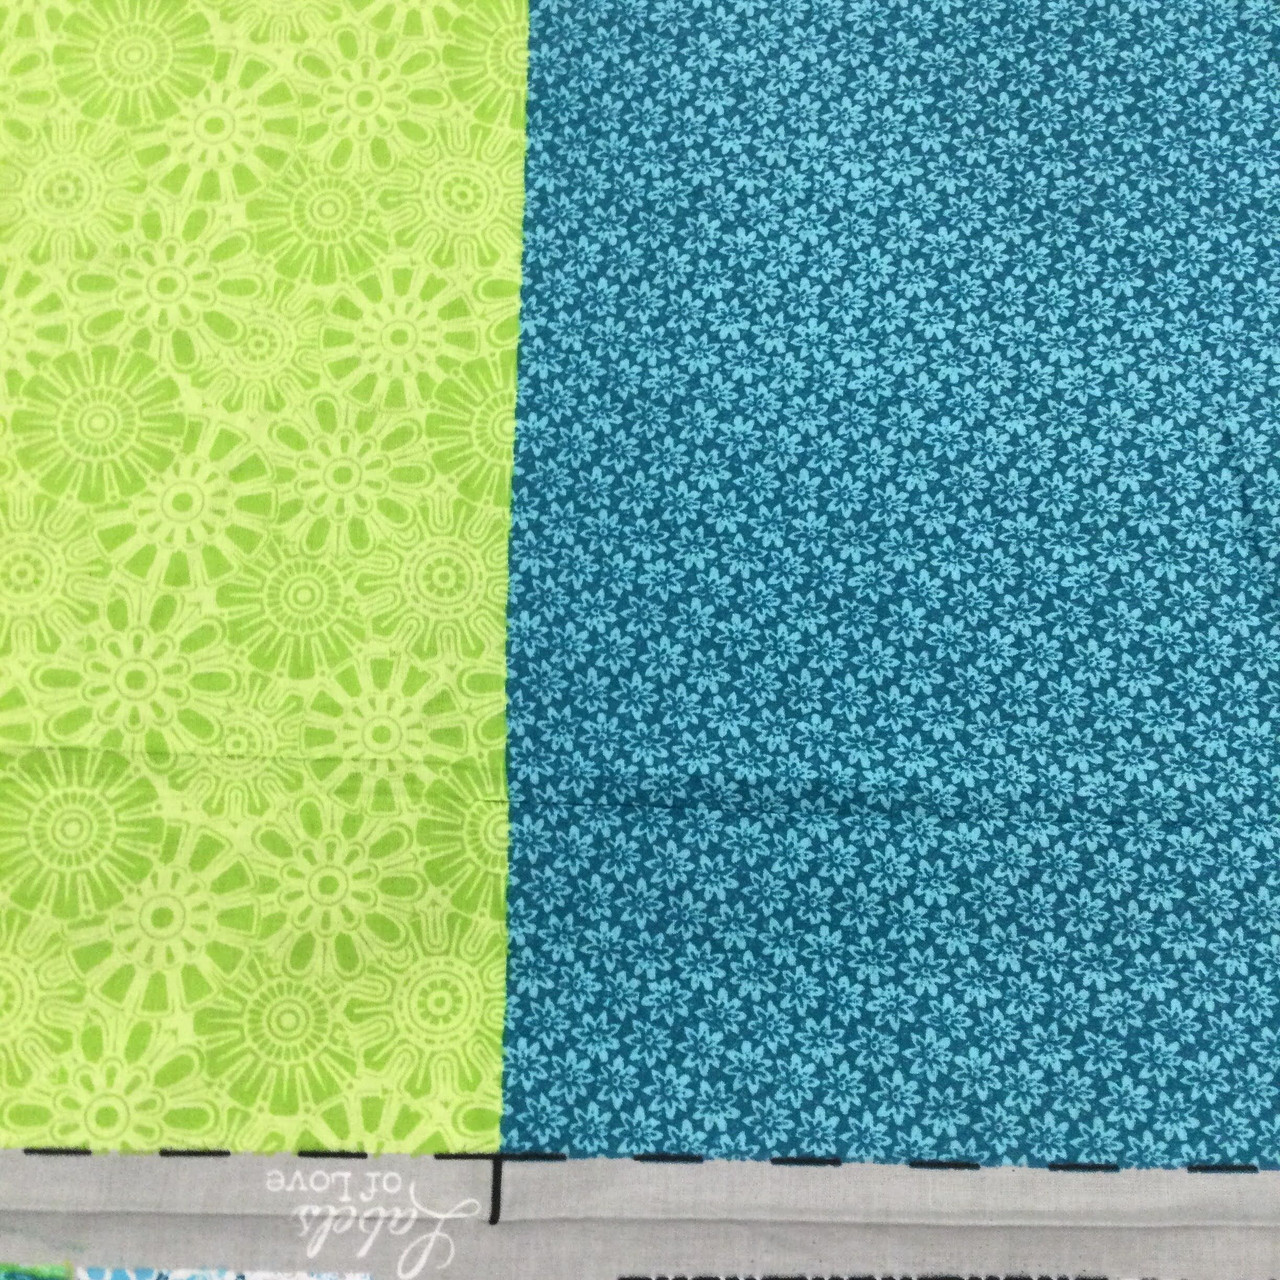 Fabric - Fabric Panels & Yardage - All Fabric Panels - Welcome to Our  Neighborhood Teal Block Panel 24 x 44